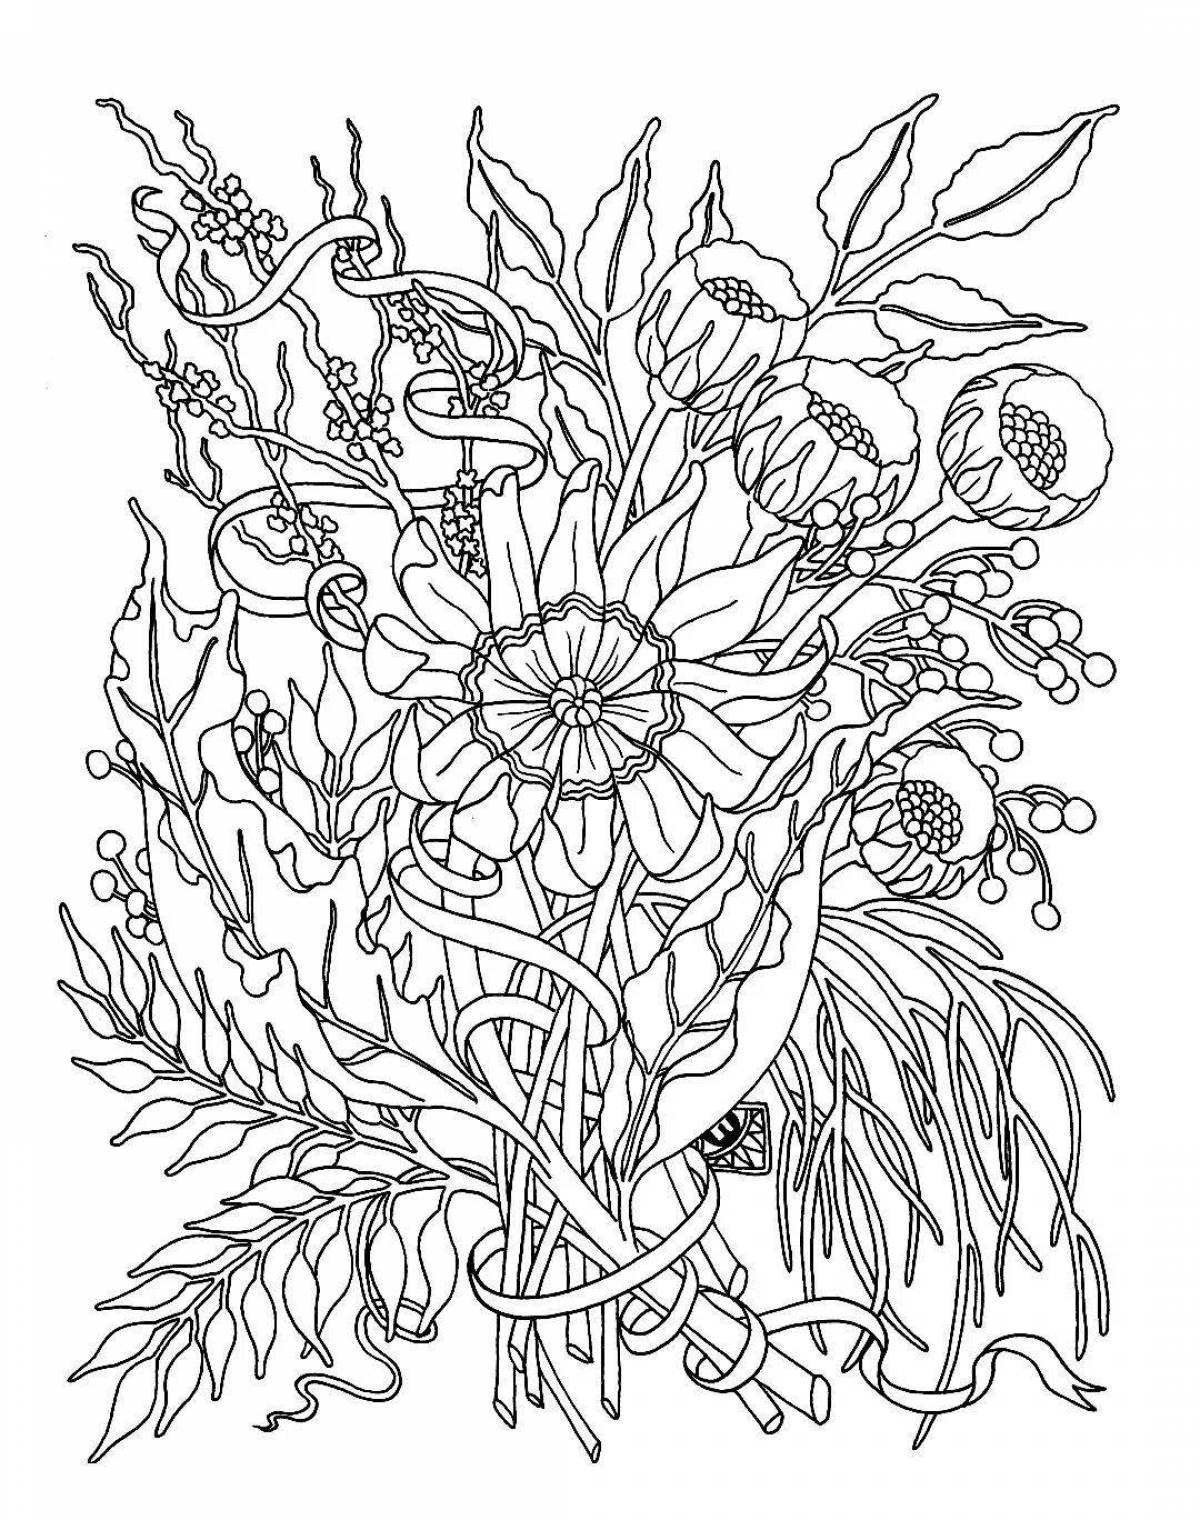 Incredibly complex flower coloring book